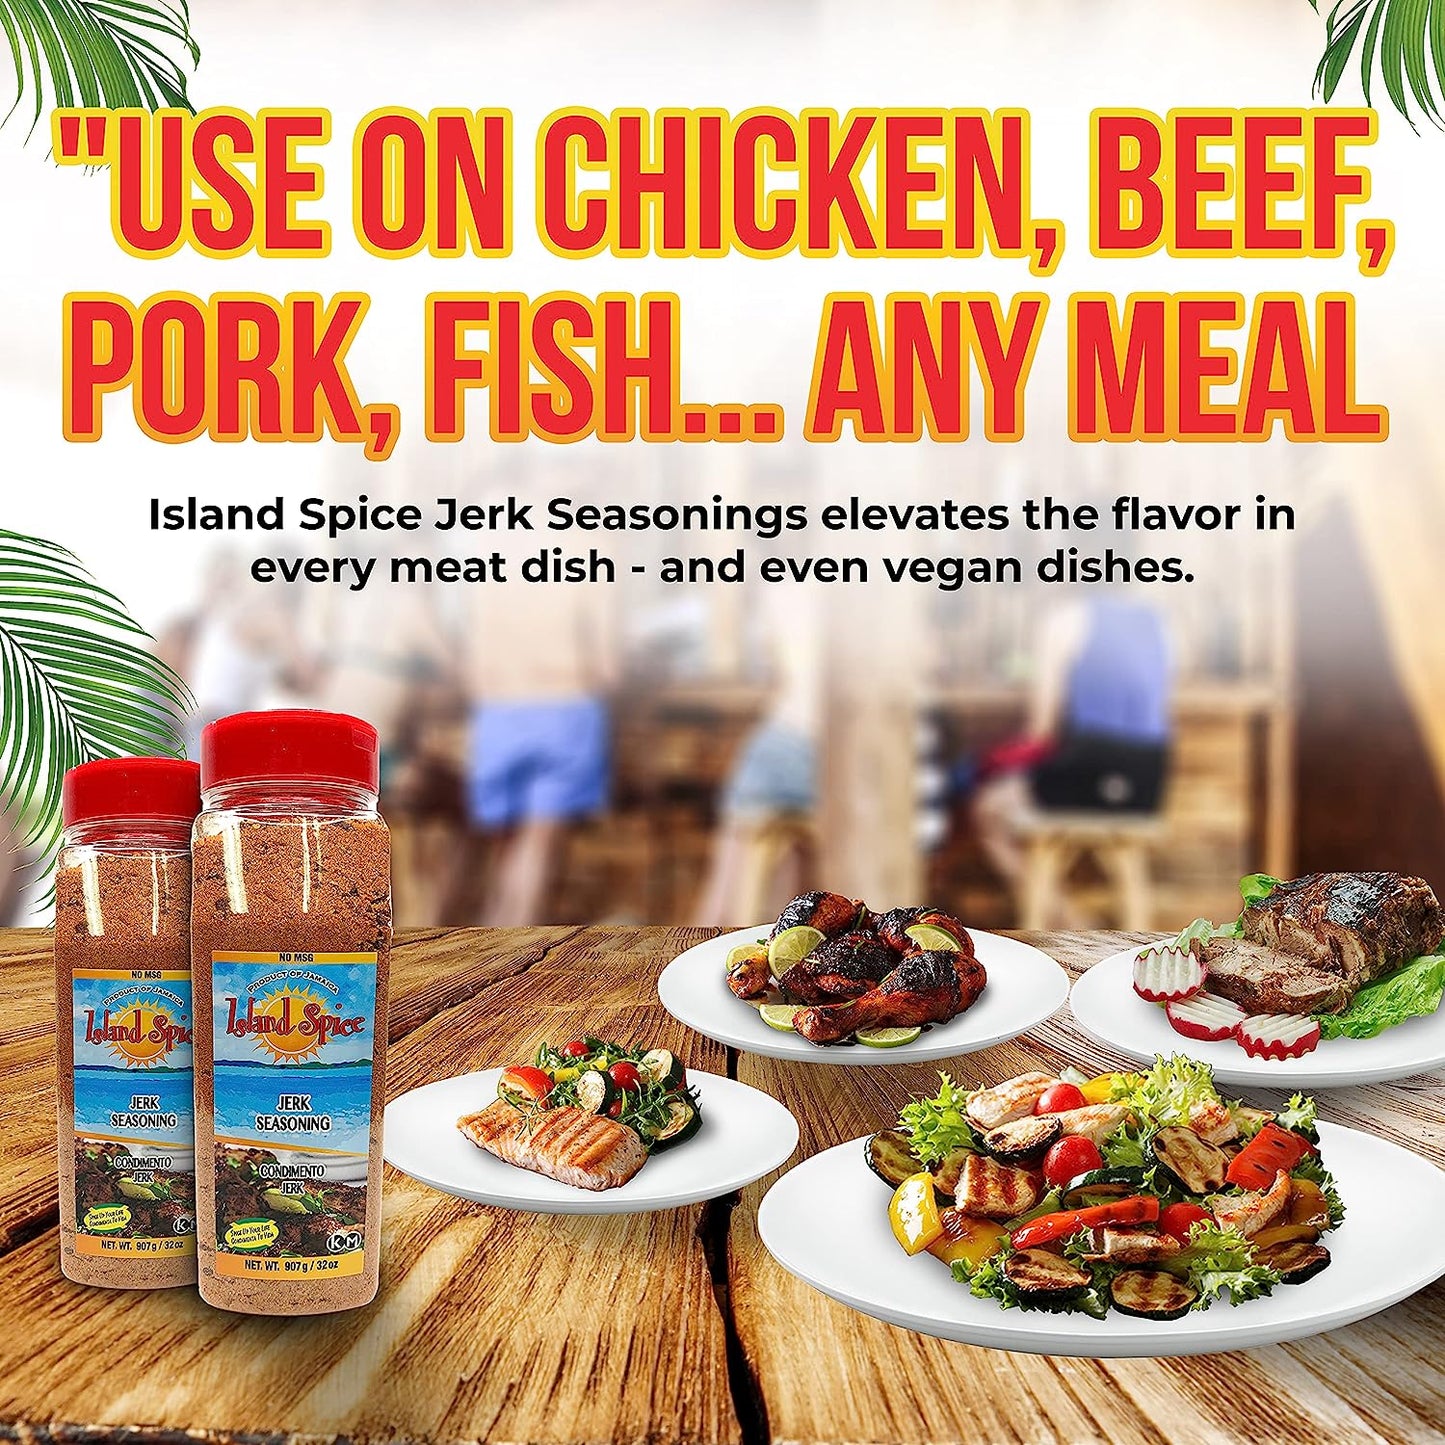 Island Spice Jerk Seasoning 32 ounces - Gluten-Free Vegan-Friendly Dry Rub with Real Jamaican Pimento - Authentic Jerk Flavors and Spice Blend - Use on Chicken, Pork, Beef, Seafood, and Vegan Dishes